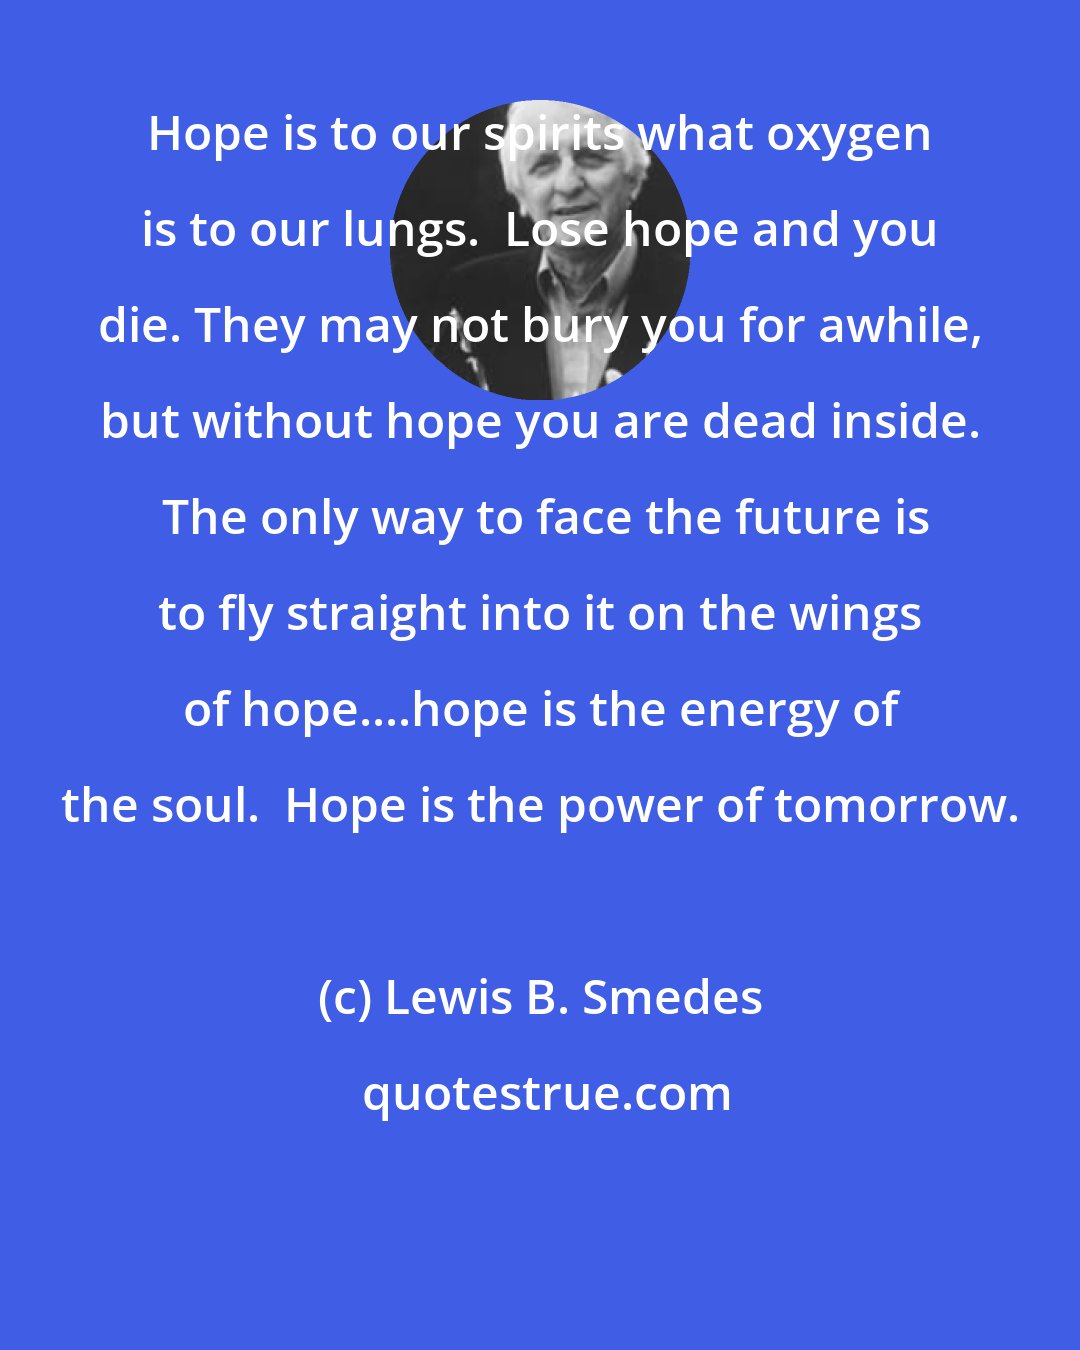 Lewis B. Smedes: Hope is to our spirits what oxygen is to our lungs.  Lose hope and you die. They may not bury you for awhile, but without hope you are dead inside.  The only way to face the future is to fly straight into it on the wings of hope....hope is the energy of the soul.  Hope is the power of tomorrow.